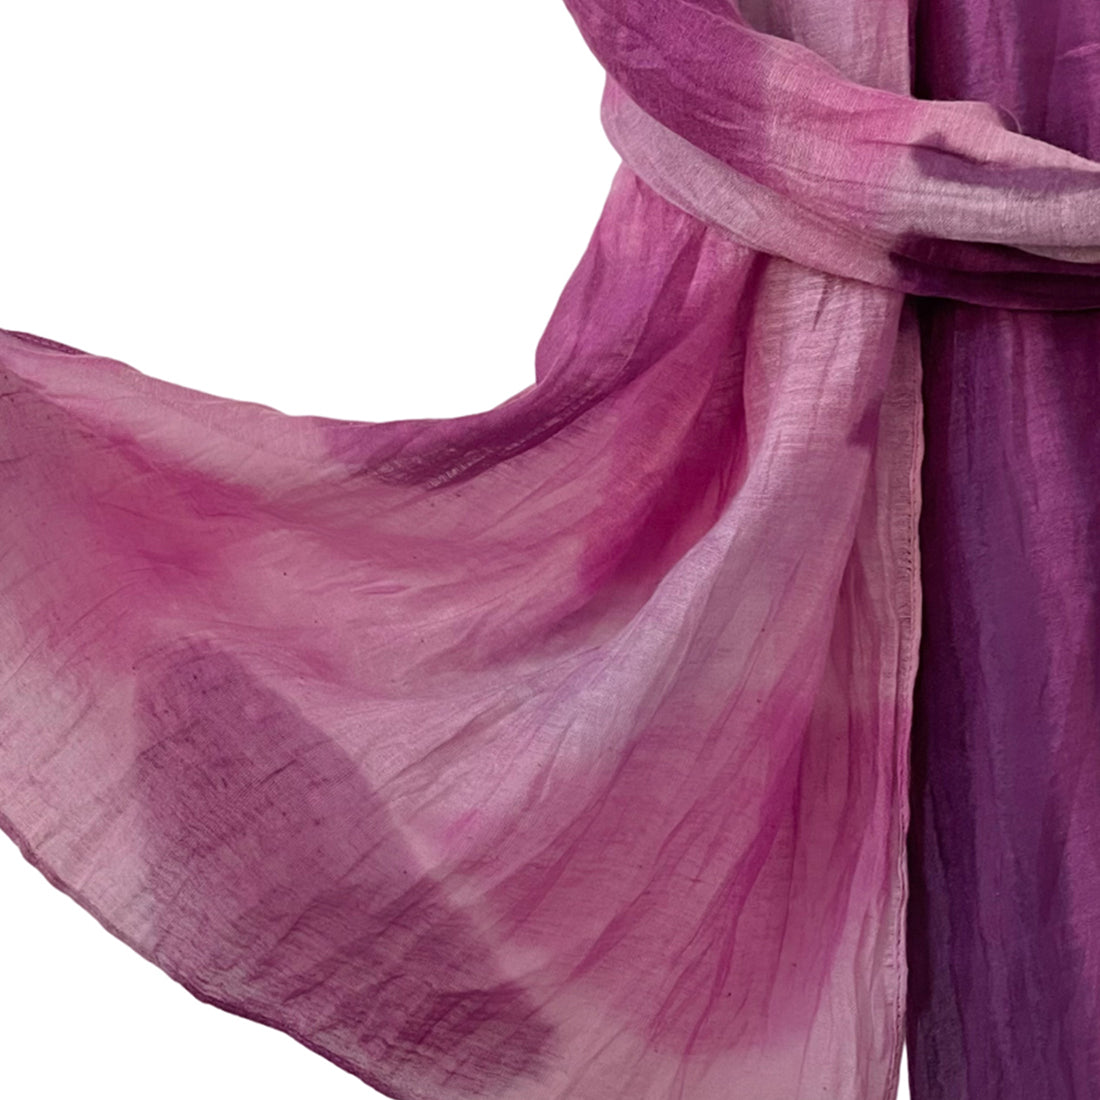 Criss-Cross Striped & Circular Patches Pink & Dark Purple Ombre Silk-Cotton Blend Crinkle Effect Scarf